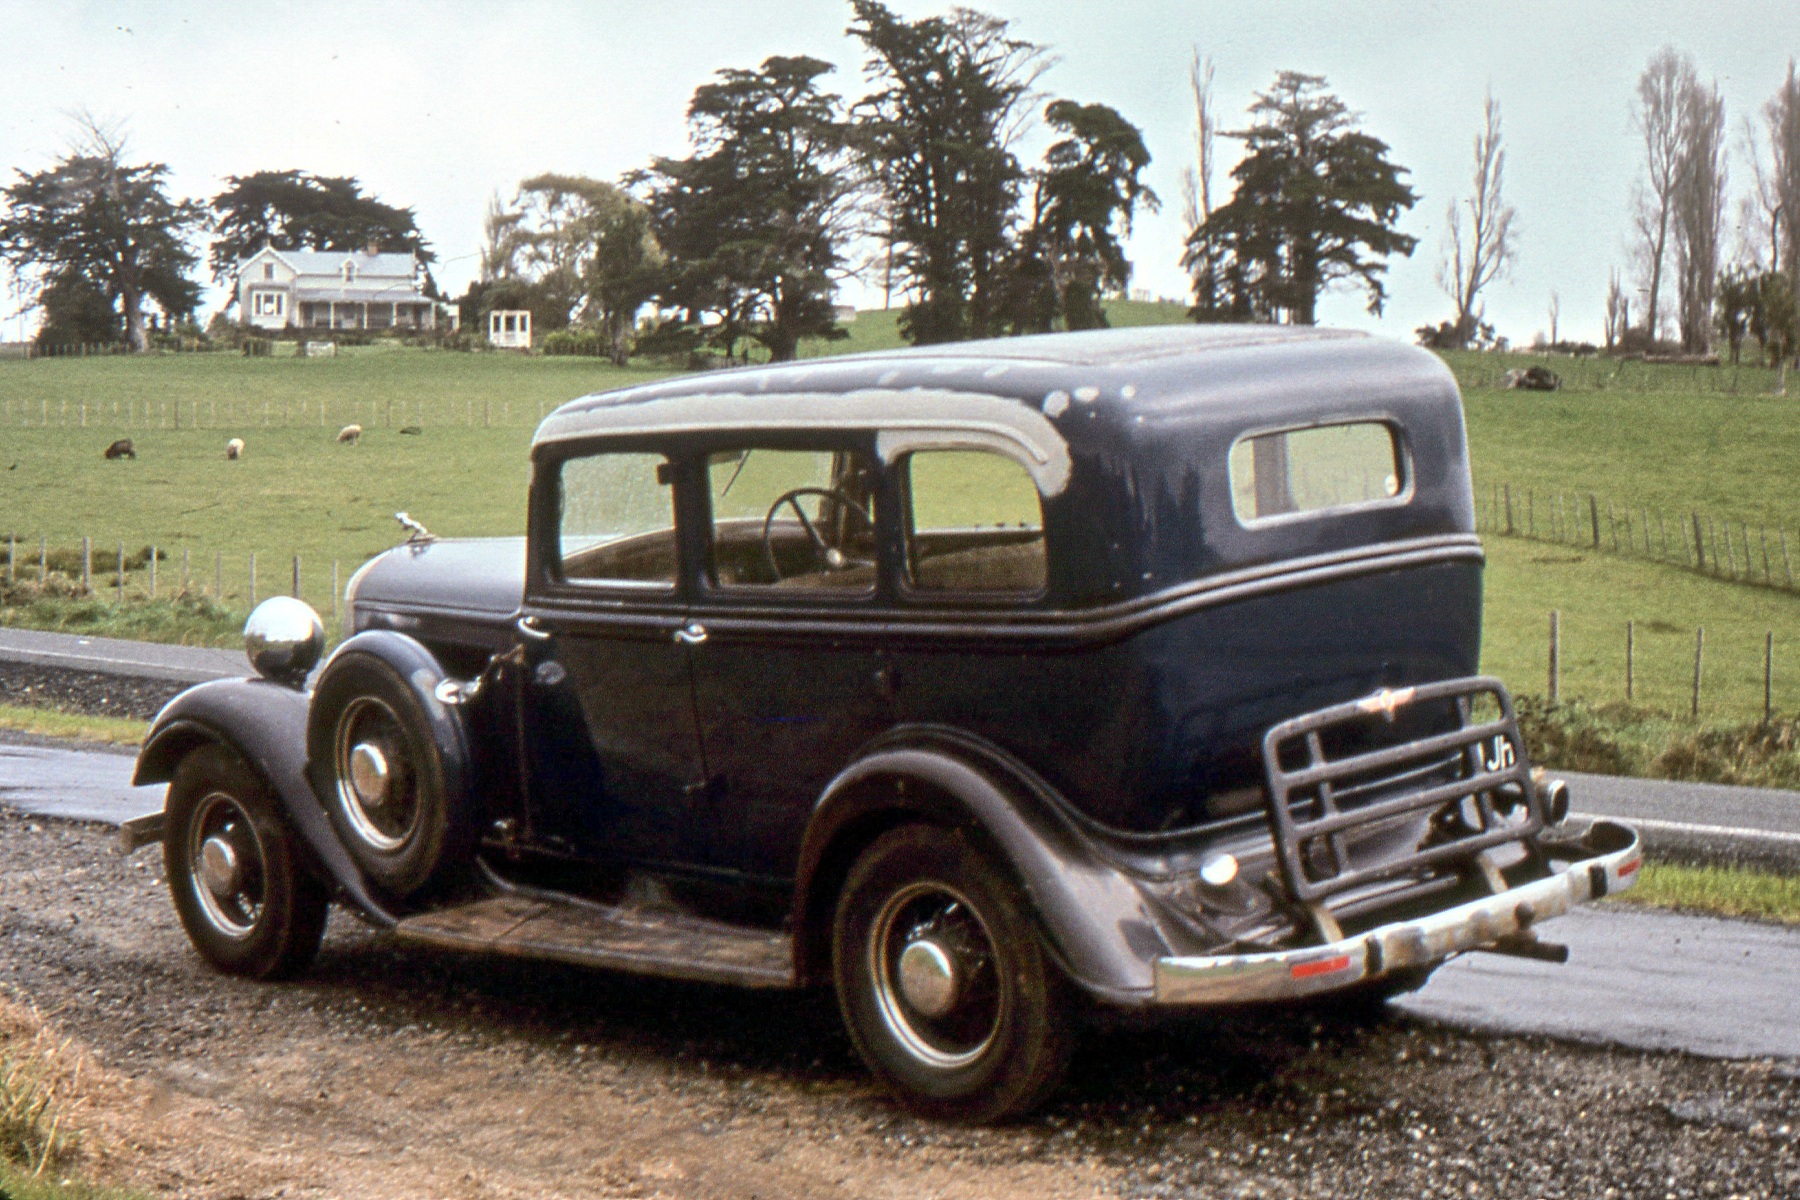 Re: 1933 dodge 4dr sedan. Here is an original one I photographed at the side